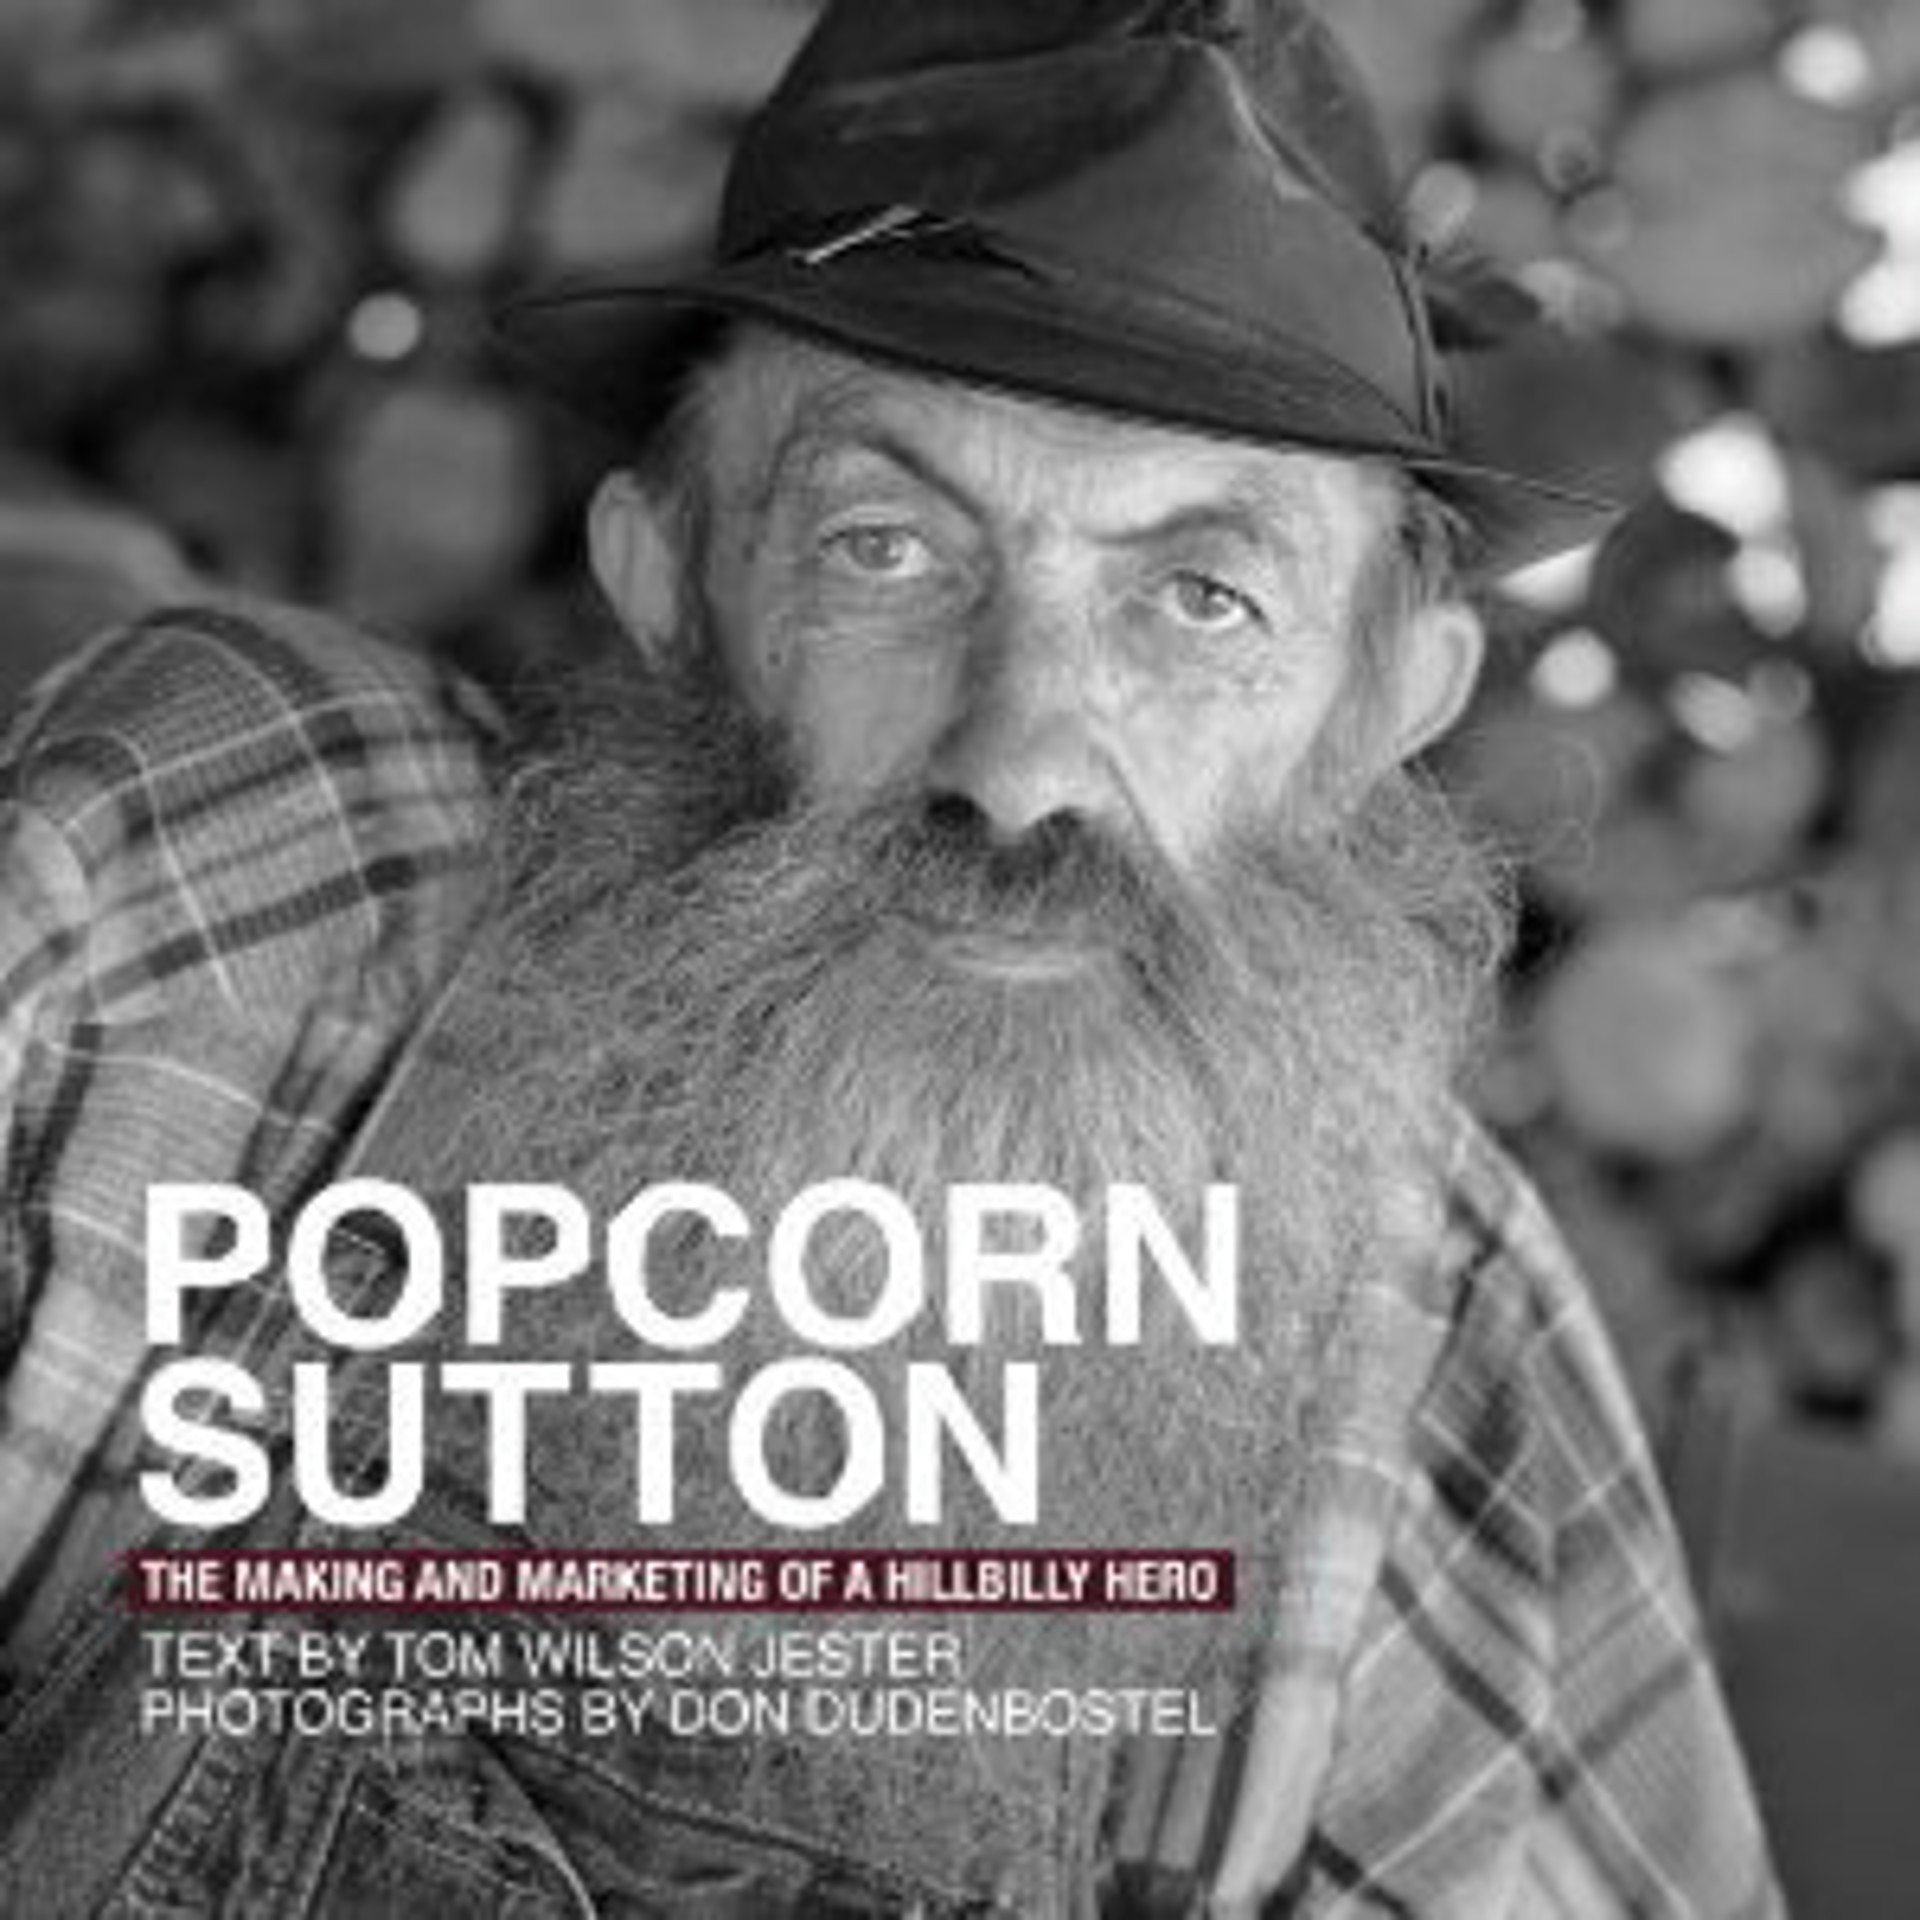 Popcorn Sutton The Making and Marketing of a Hillbilly Hero by Don Dudenbostel